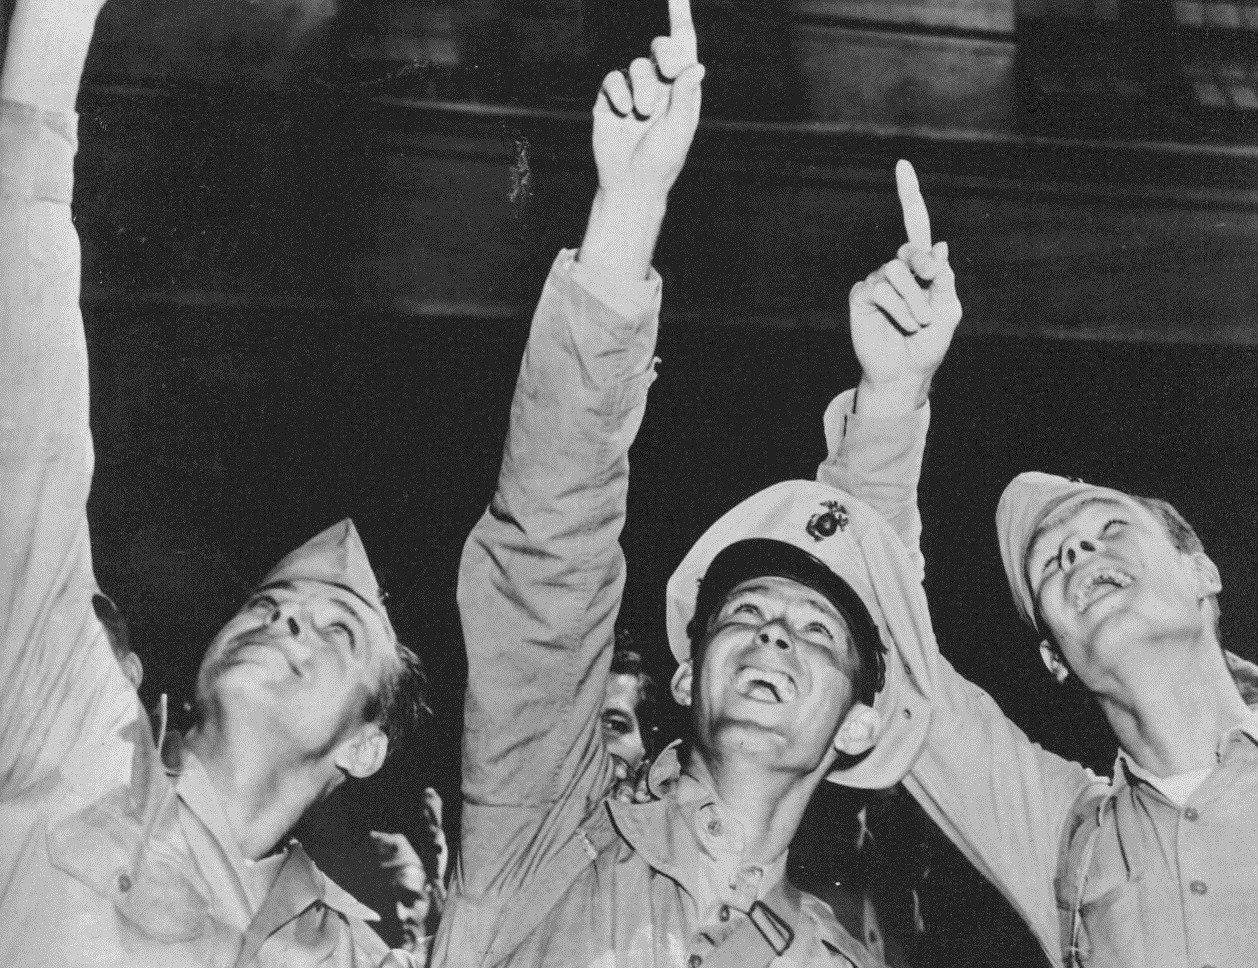 Hey, Look! Lady Marines!, 9/12/1944. San Francisco -- Thrilled with their first glimpse of office buildings, street cars, and lady Marines, these three veterans of famed Second Marine Division, who returned to San Francisco after more than two years of fighting in Central and South Pacific, really enjoy sightseeing. Left to right: PFC Boyd R. Magnuson, Riverside, Calif.; Pvt. Walter C. Tash, Fort Smith, Ark.; and PFC Charles Robinett, Cleveland, Tex. 9/12/44 (ACME);